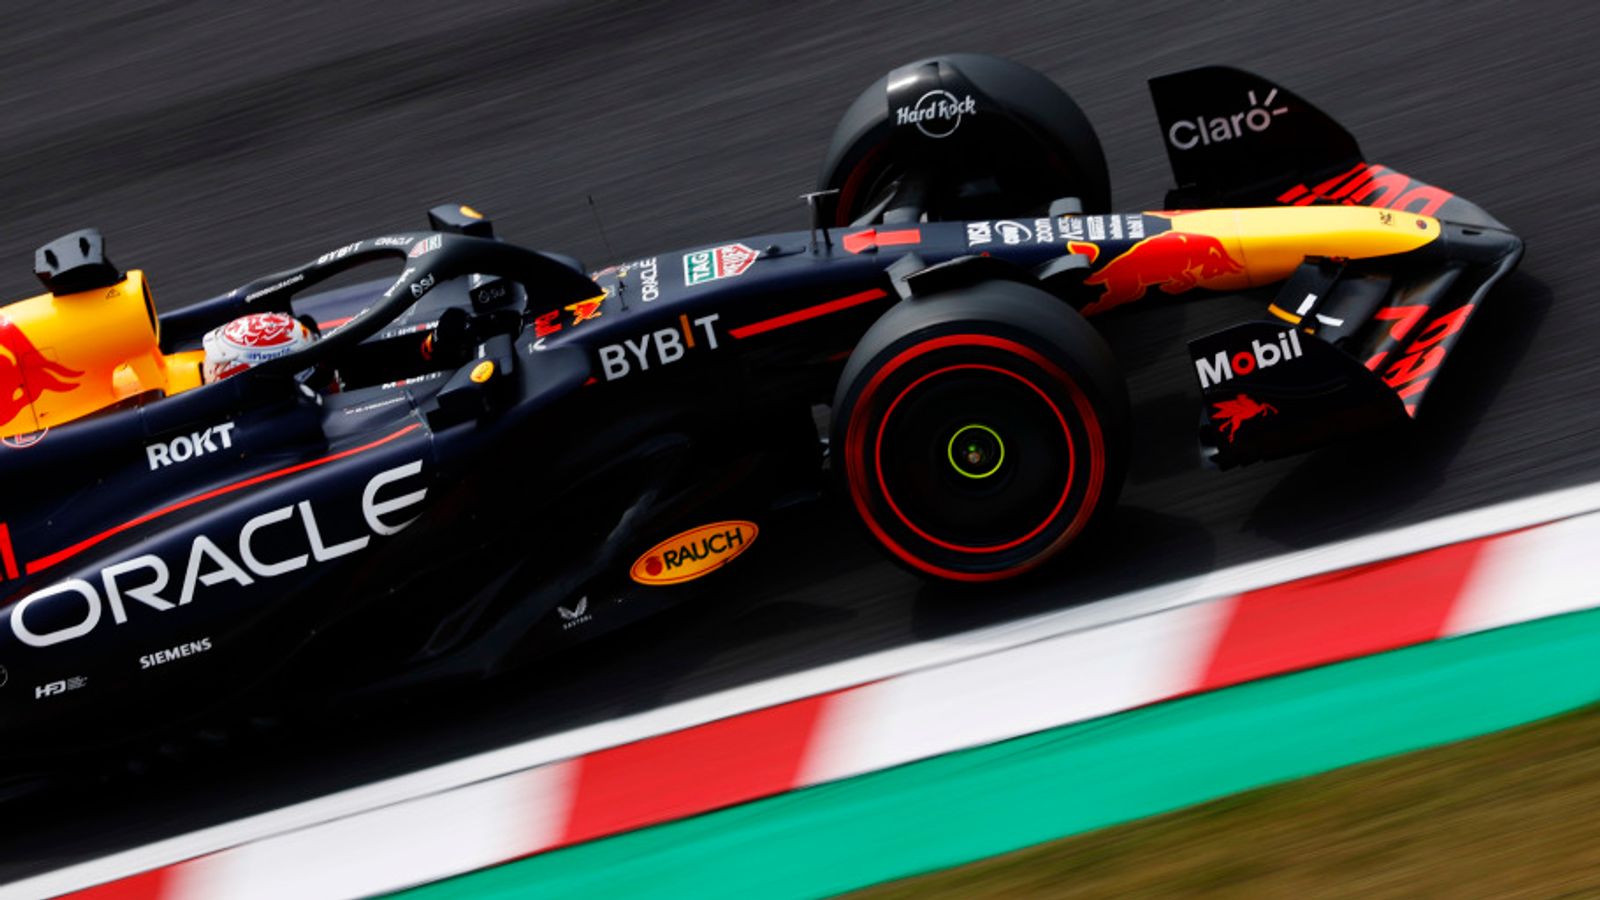 Max Verstappen leads final practice for the Japanese Grand Prix ahead of Sergio Perez